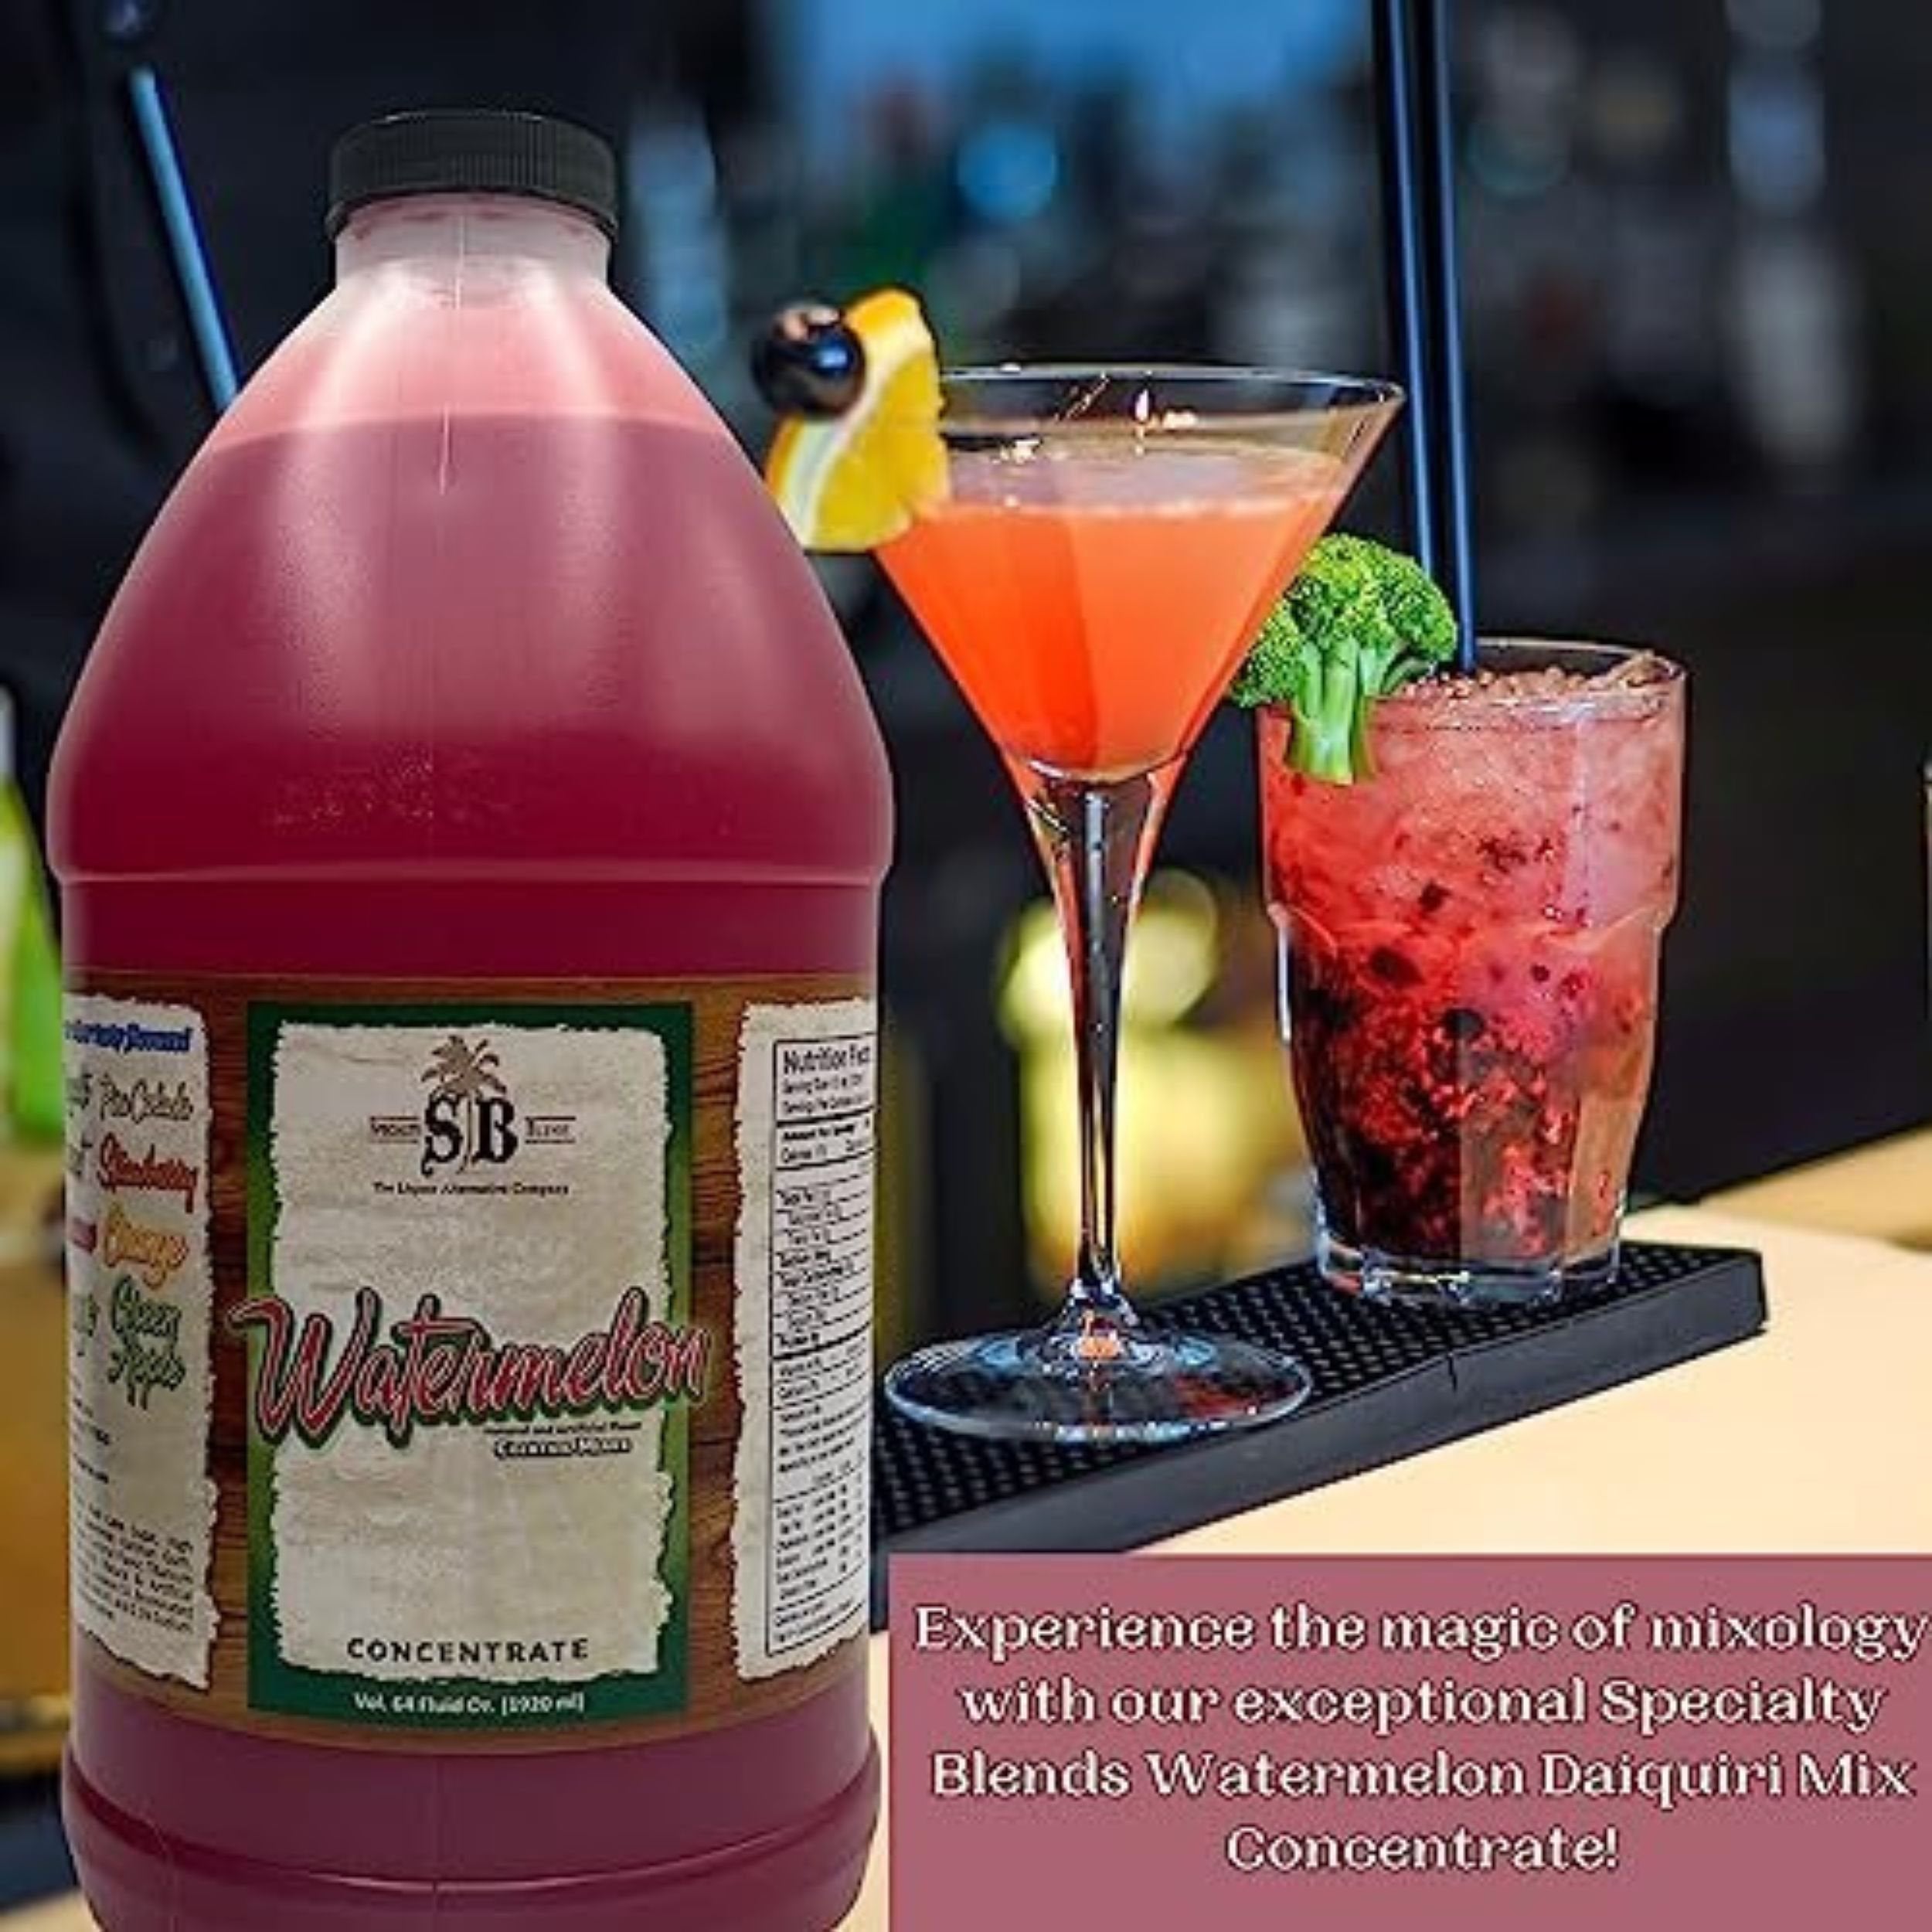 Specialty Blends Watermelon Syrup Margarita Mix Concentrate, Made with Organic Watermelon 1/2 Gallon Drink Mix (Pack of 1) - with Bonus Worldwide Nutrition Multi Purpose Key Chain